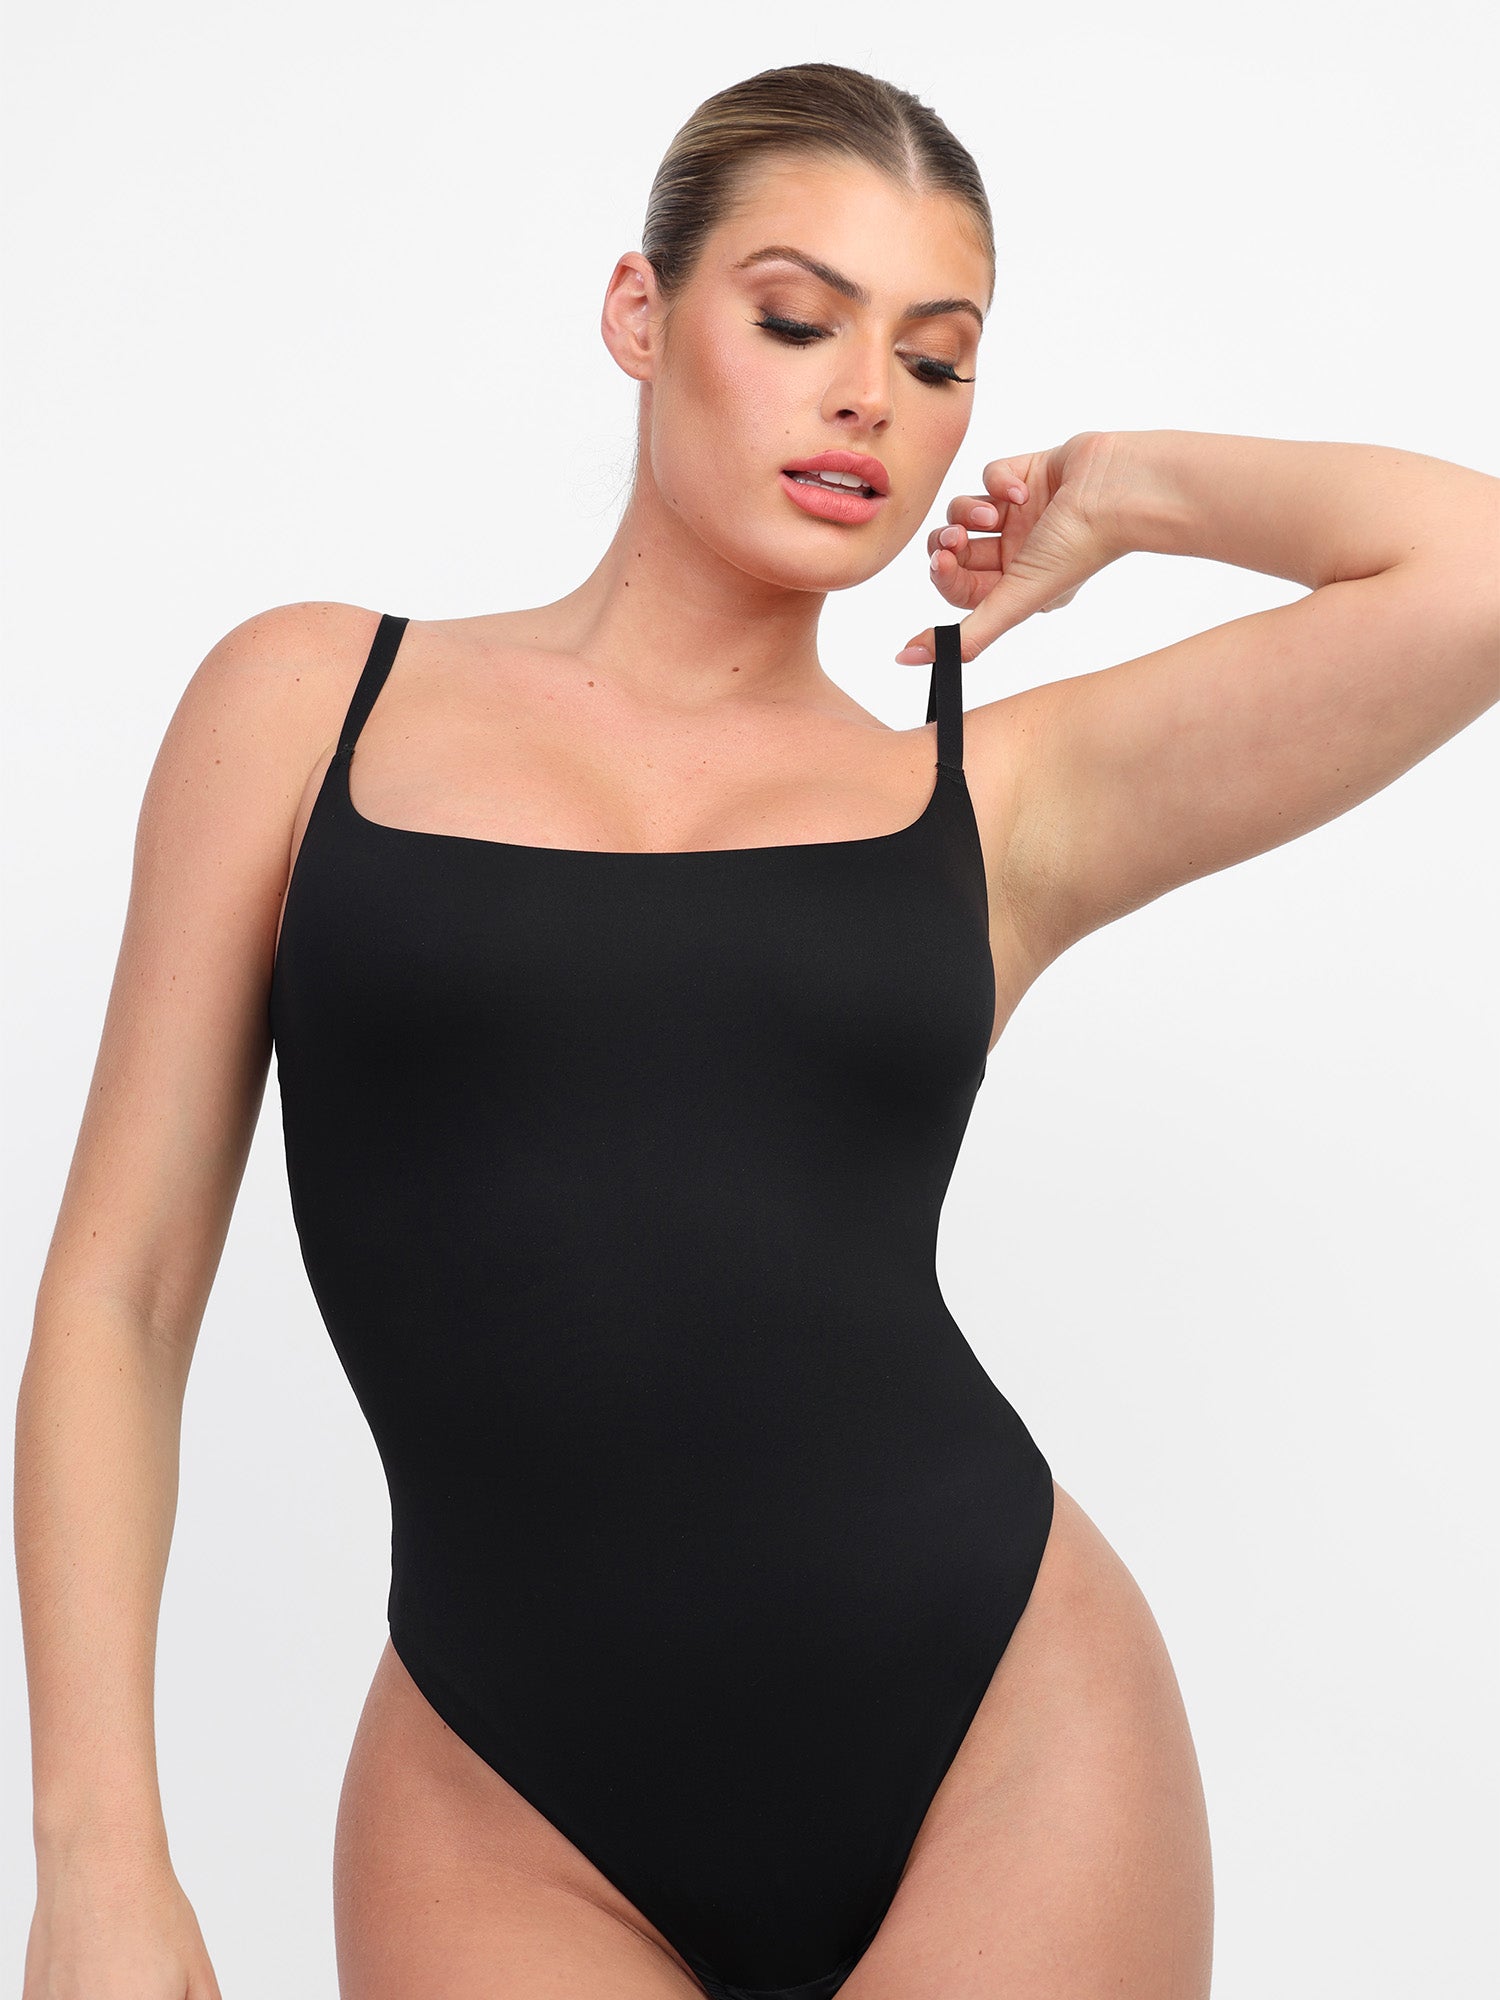 Made with CloudSense fabric, the Soft High-Cut Thong Shapewear Bodysuit features a double-layer construction that's incredibly soft, lightweight, and seamless. It hugs your figure for a comfortable, perfect fit.